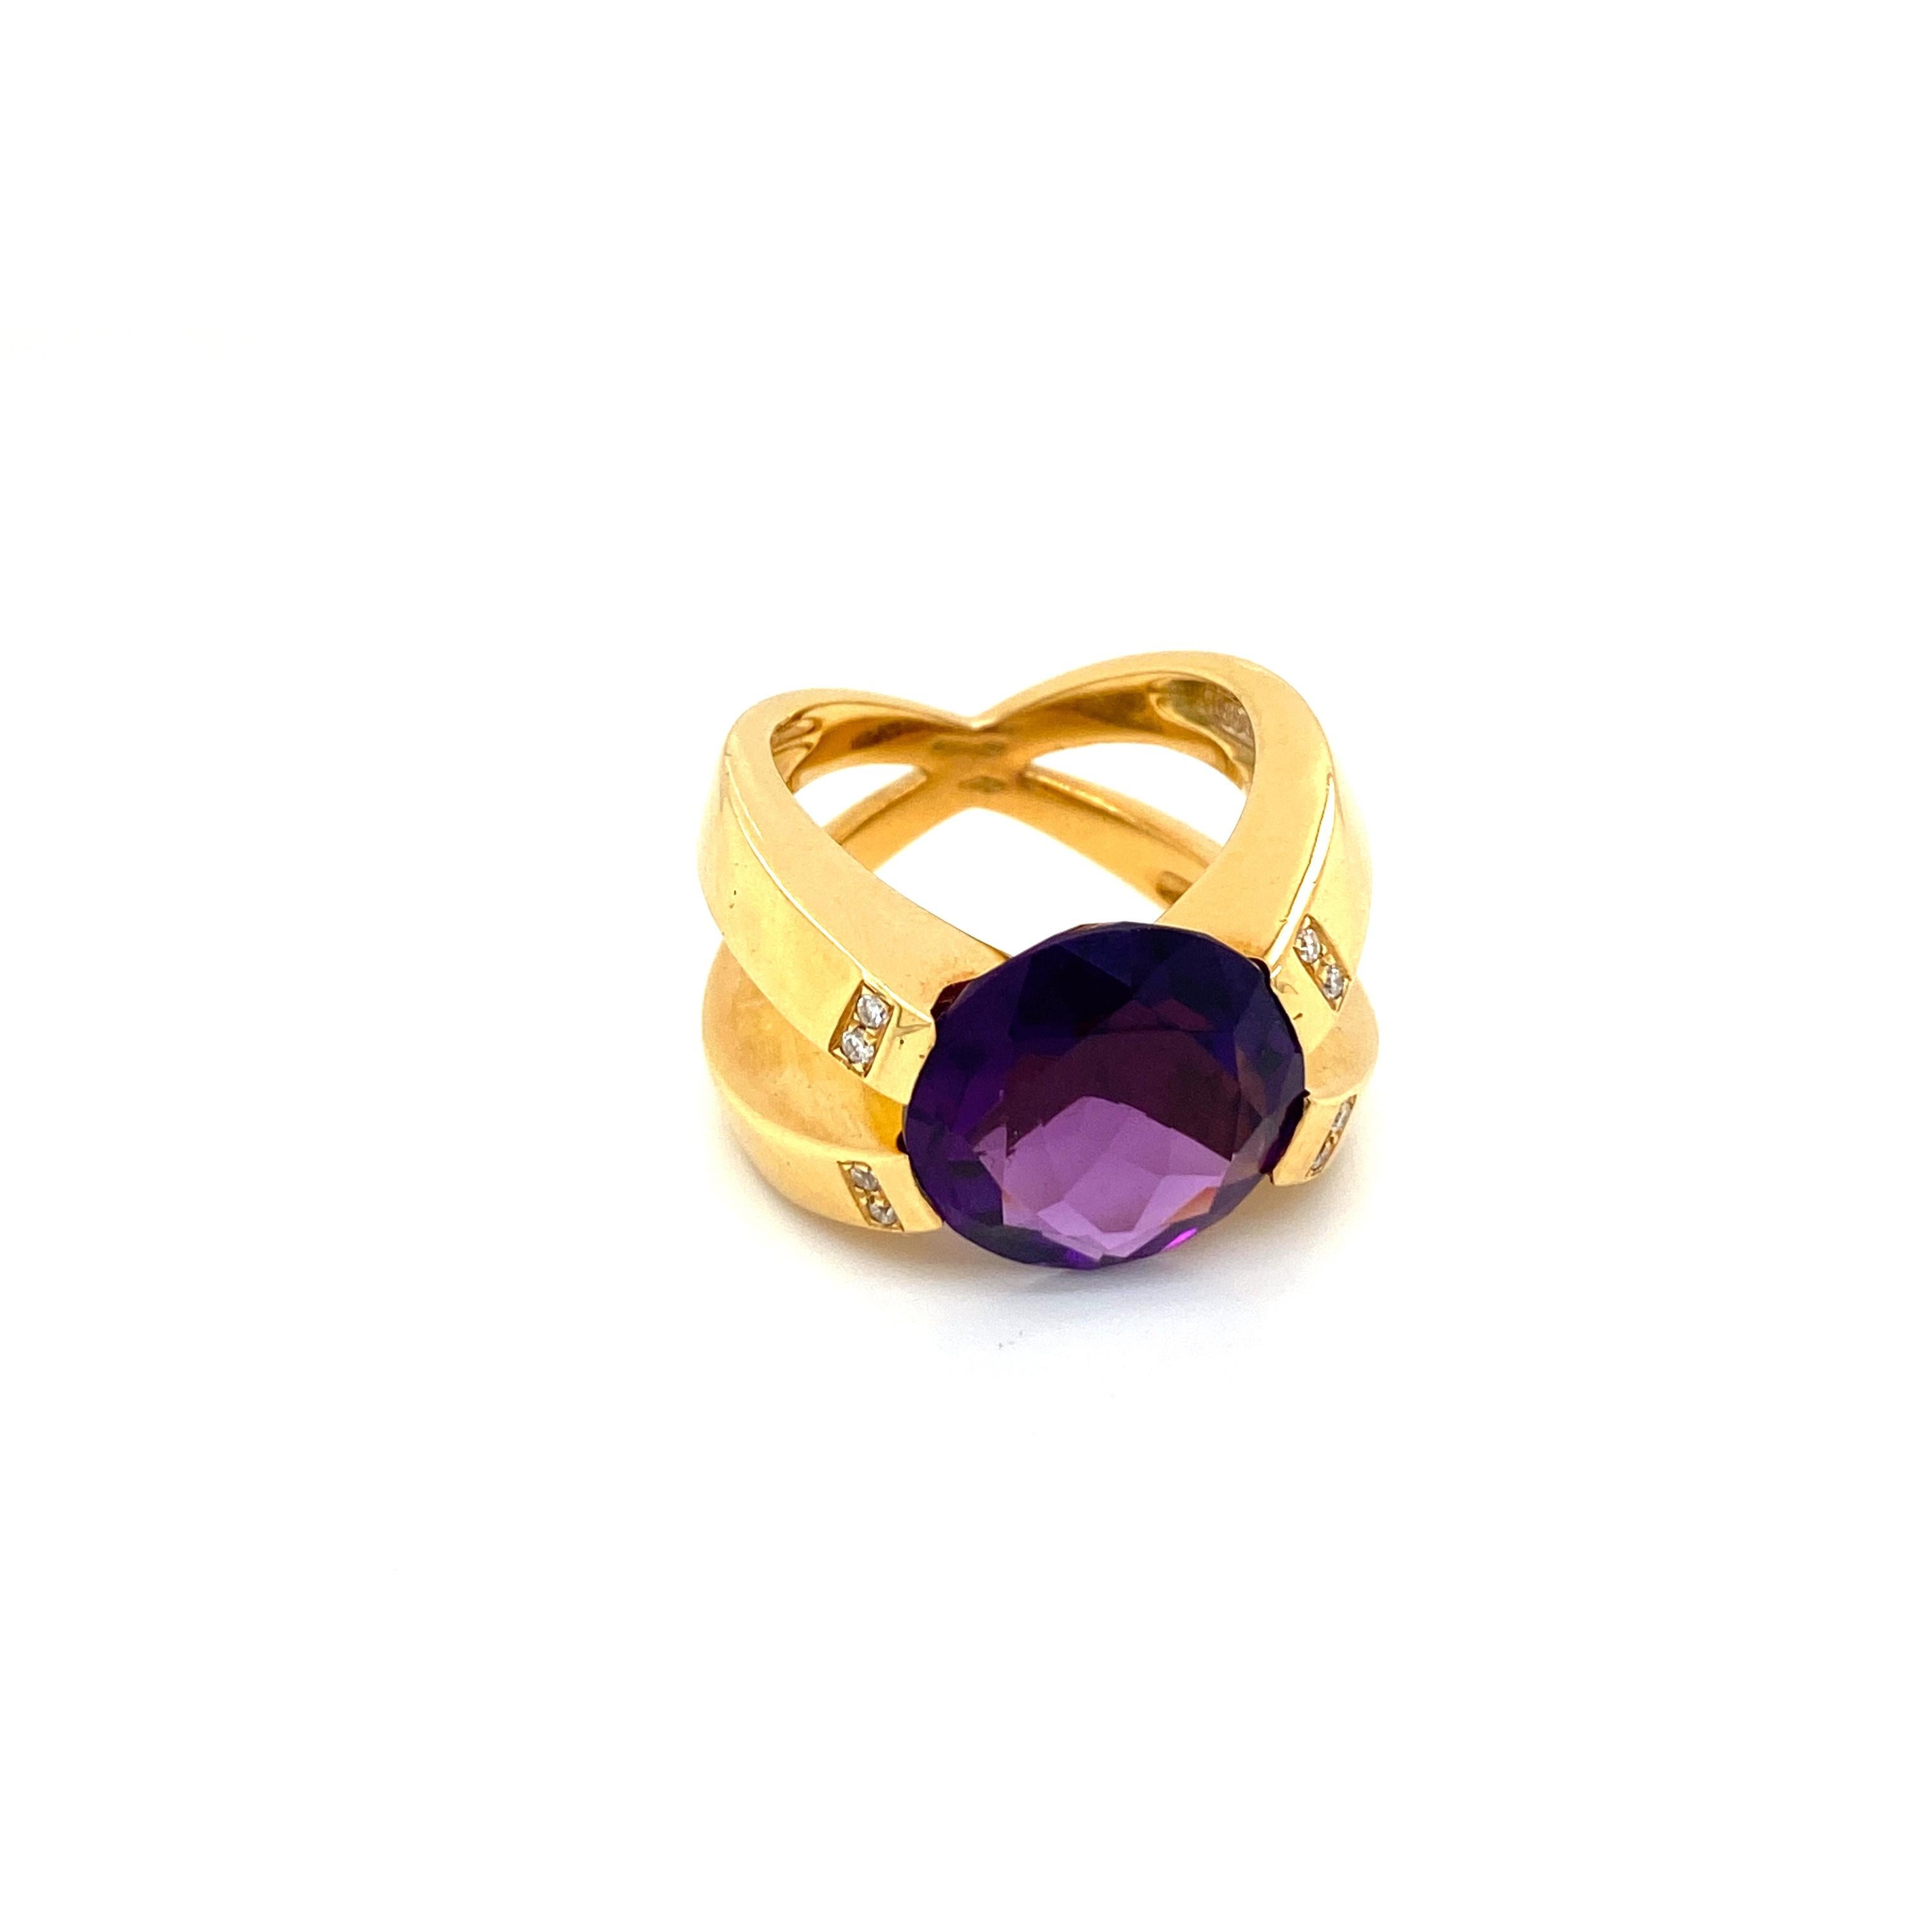 Unusual 18k yellow Gold, Amethyst and Diamond Design Ring, set in the center with a Round brilliant-cut Vivid Natural Amethyst, weighing approximately 10 carats, flanked by 8 Round Brilliant cut diamonds graded Color G. clarity VvS.

Handmade in